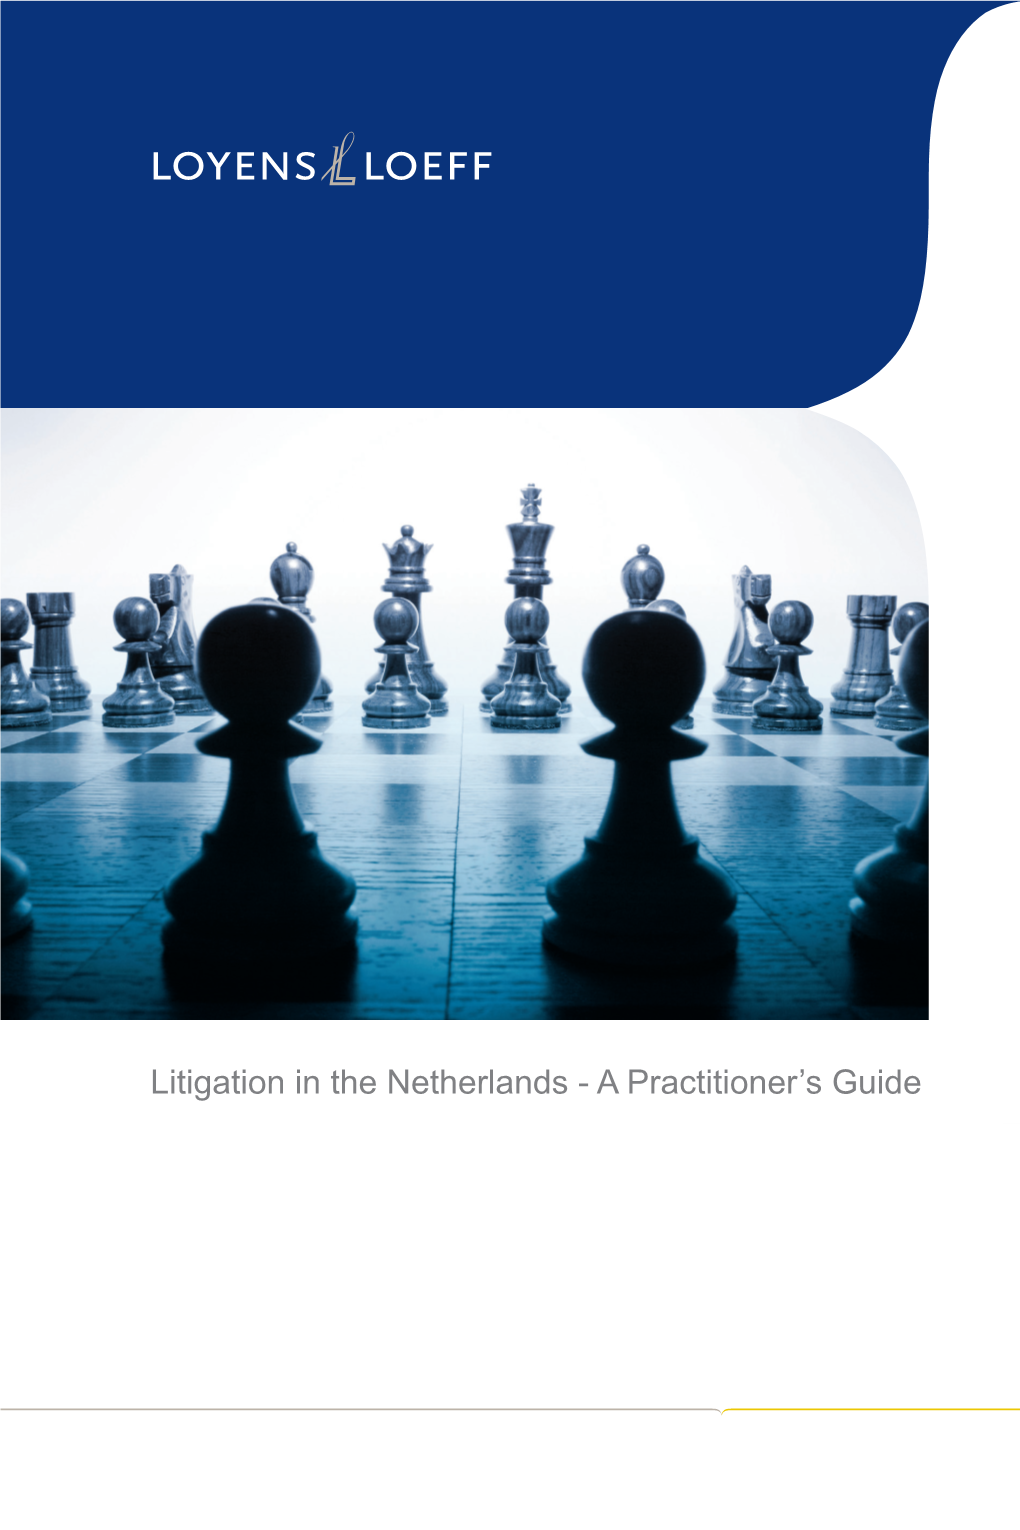 Litigation in the Netherlands - a Guide Practitioner’S Specialised in Providing Legal and Tax Advice to Enterprises, Financial Organisations and Governments